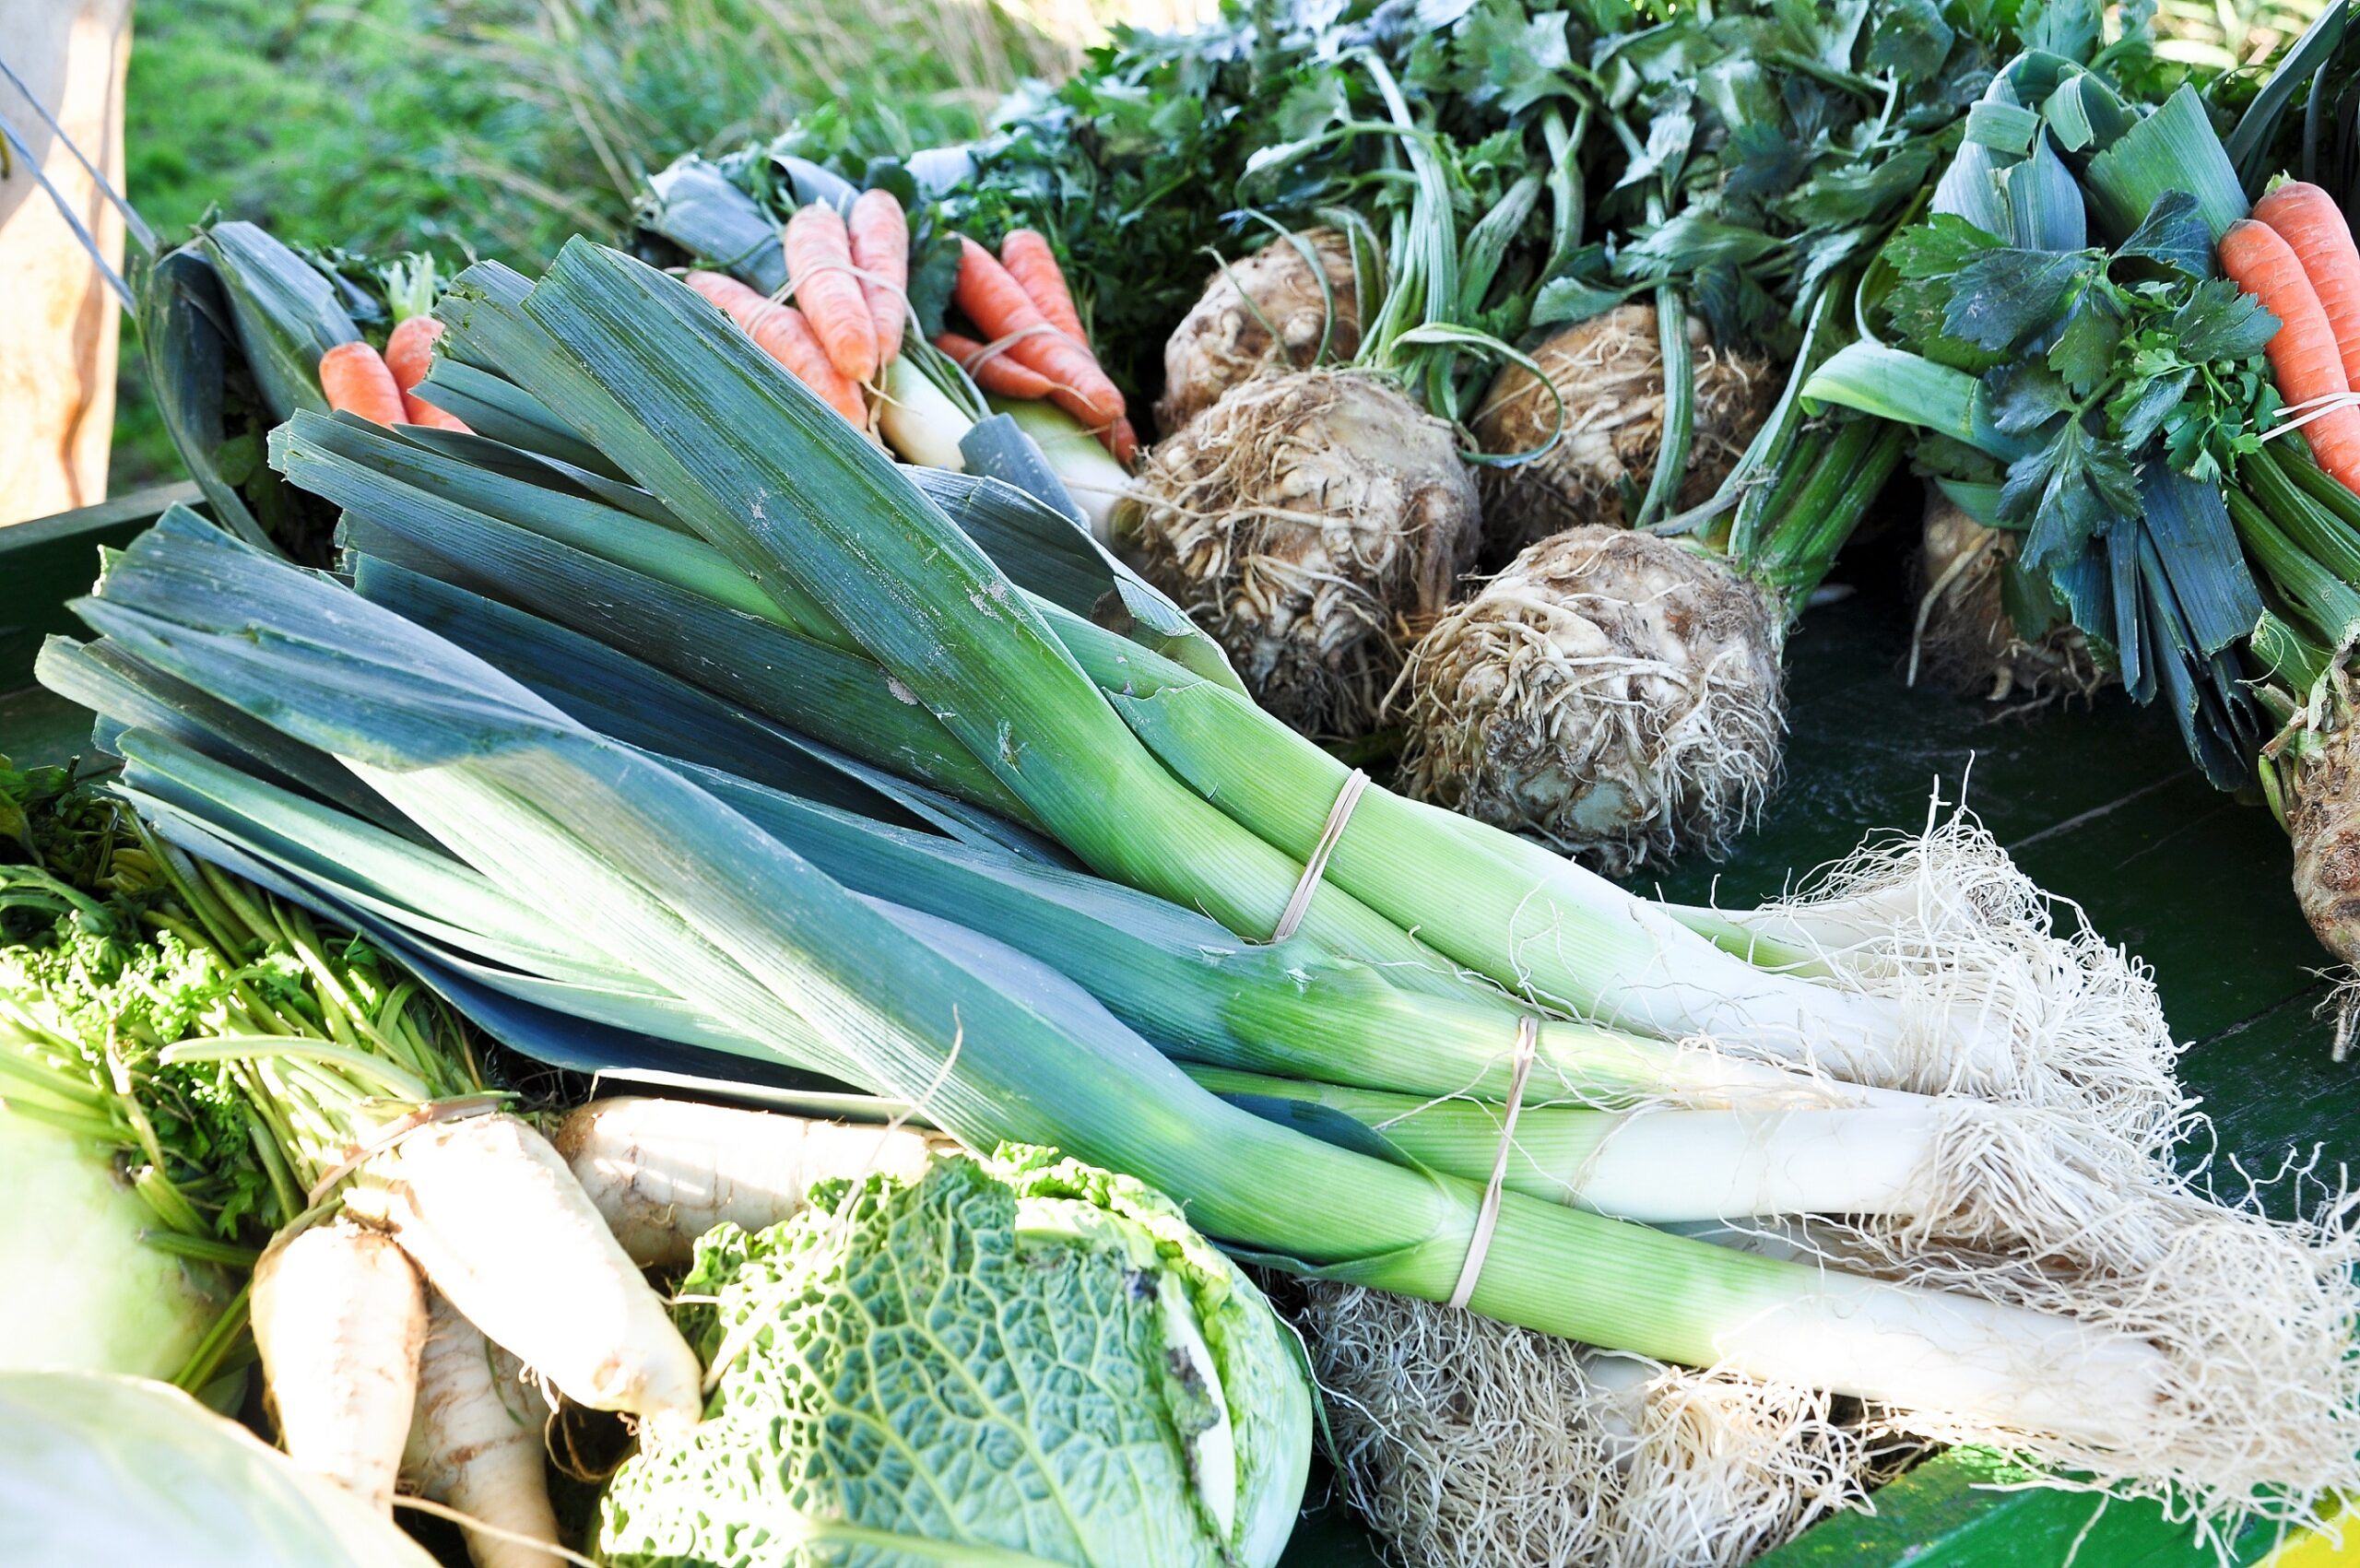 Winter vegetables: Health benefits from kale and co.